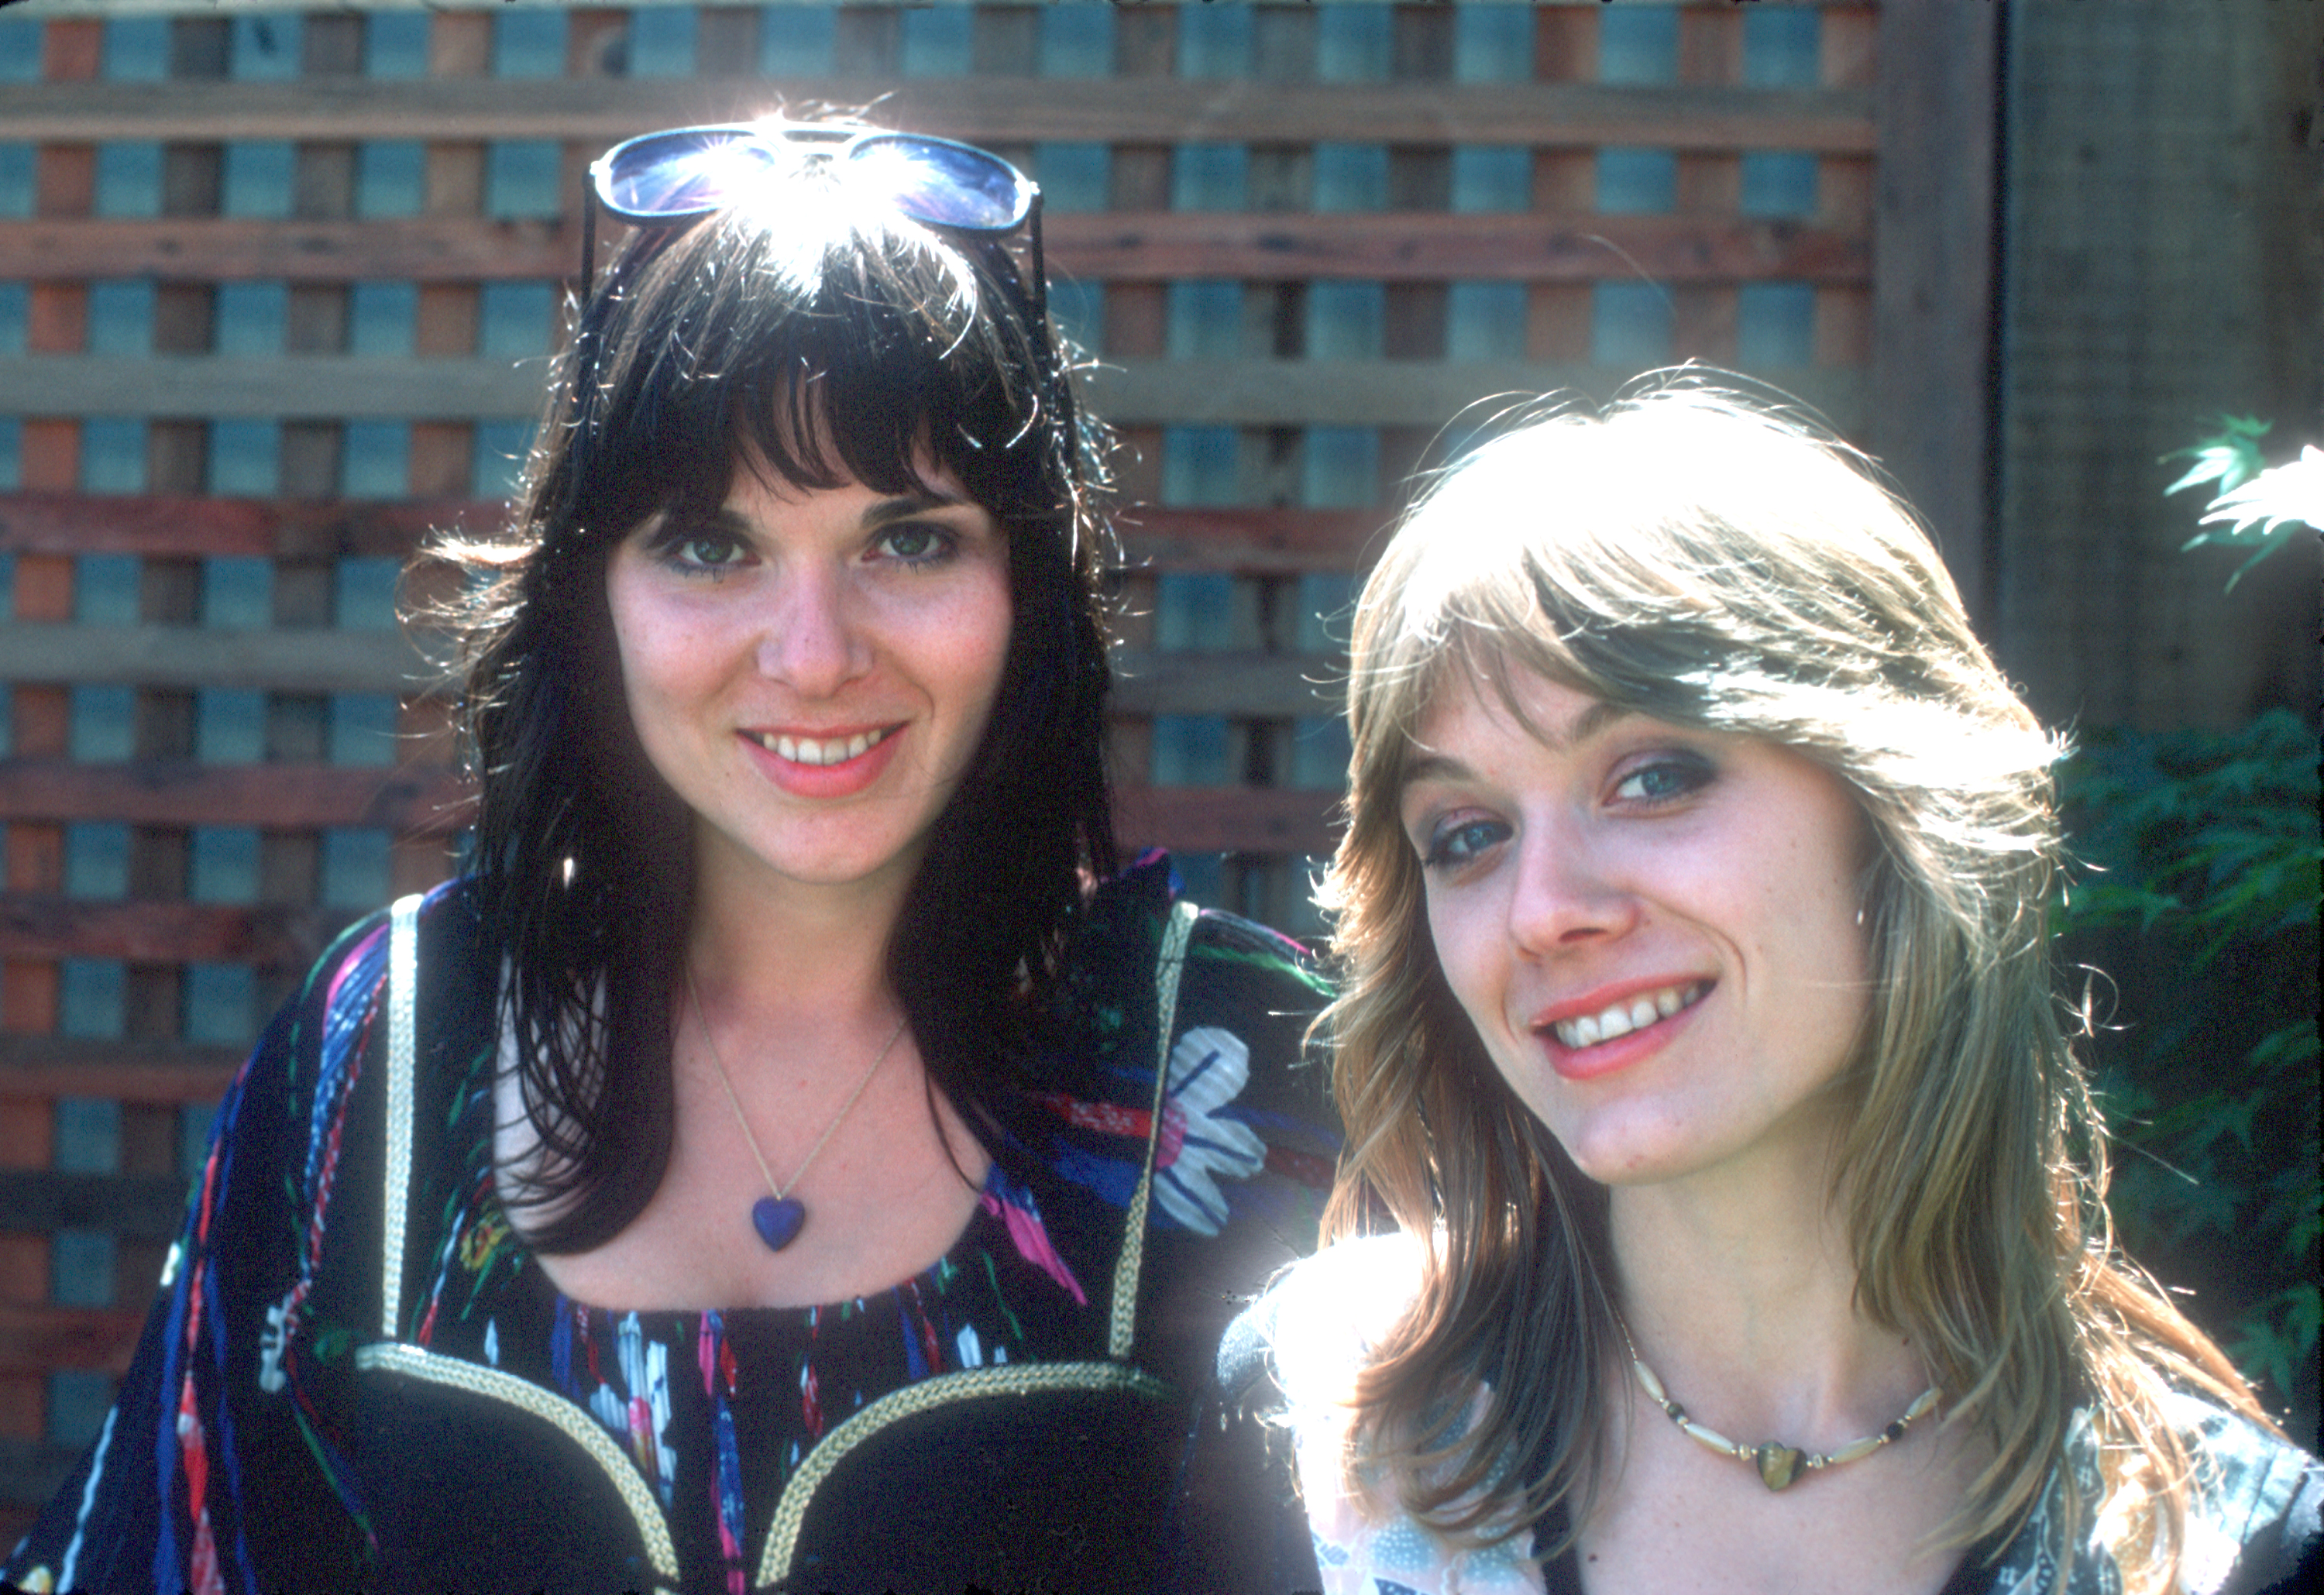 LOS ANGELES - SEPTEMBER 1976: Sisters and musicians Ann Wilson and Nancy Wi...